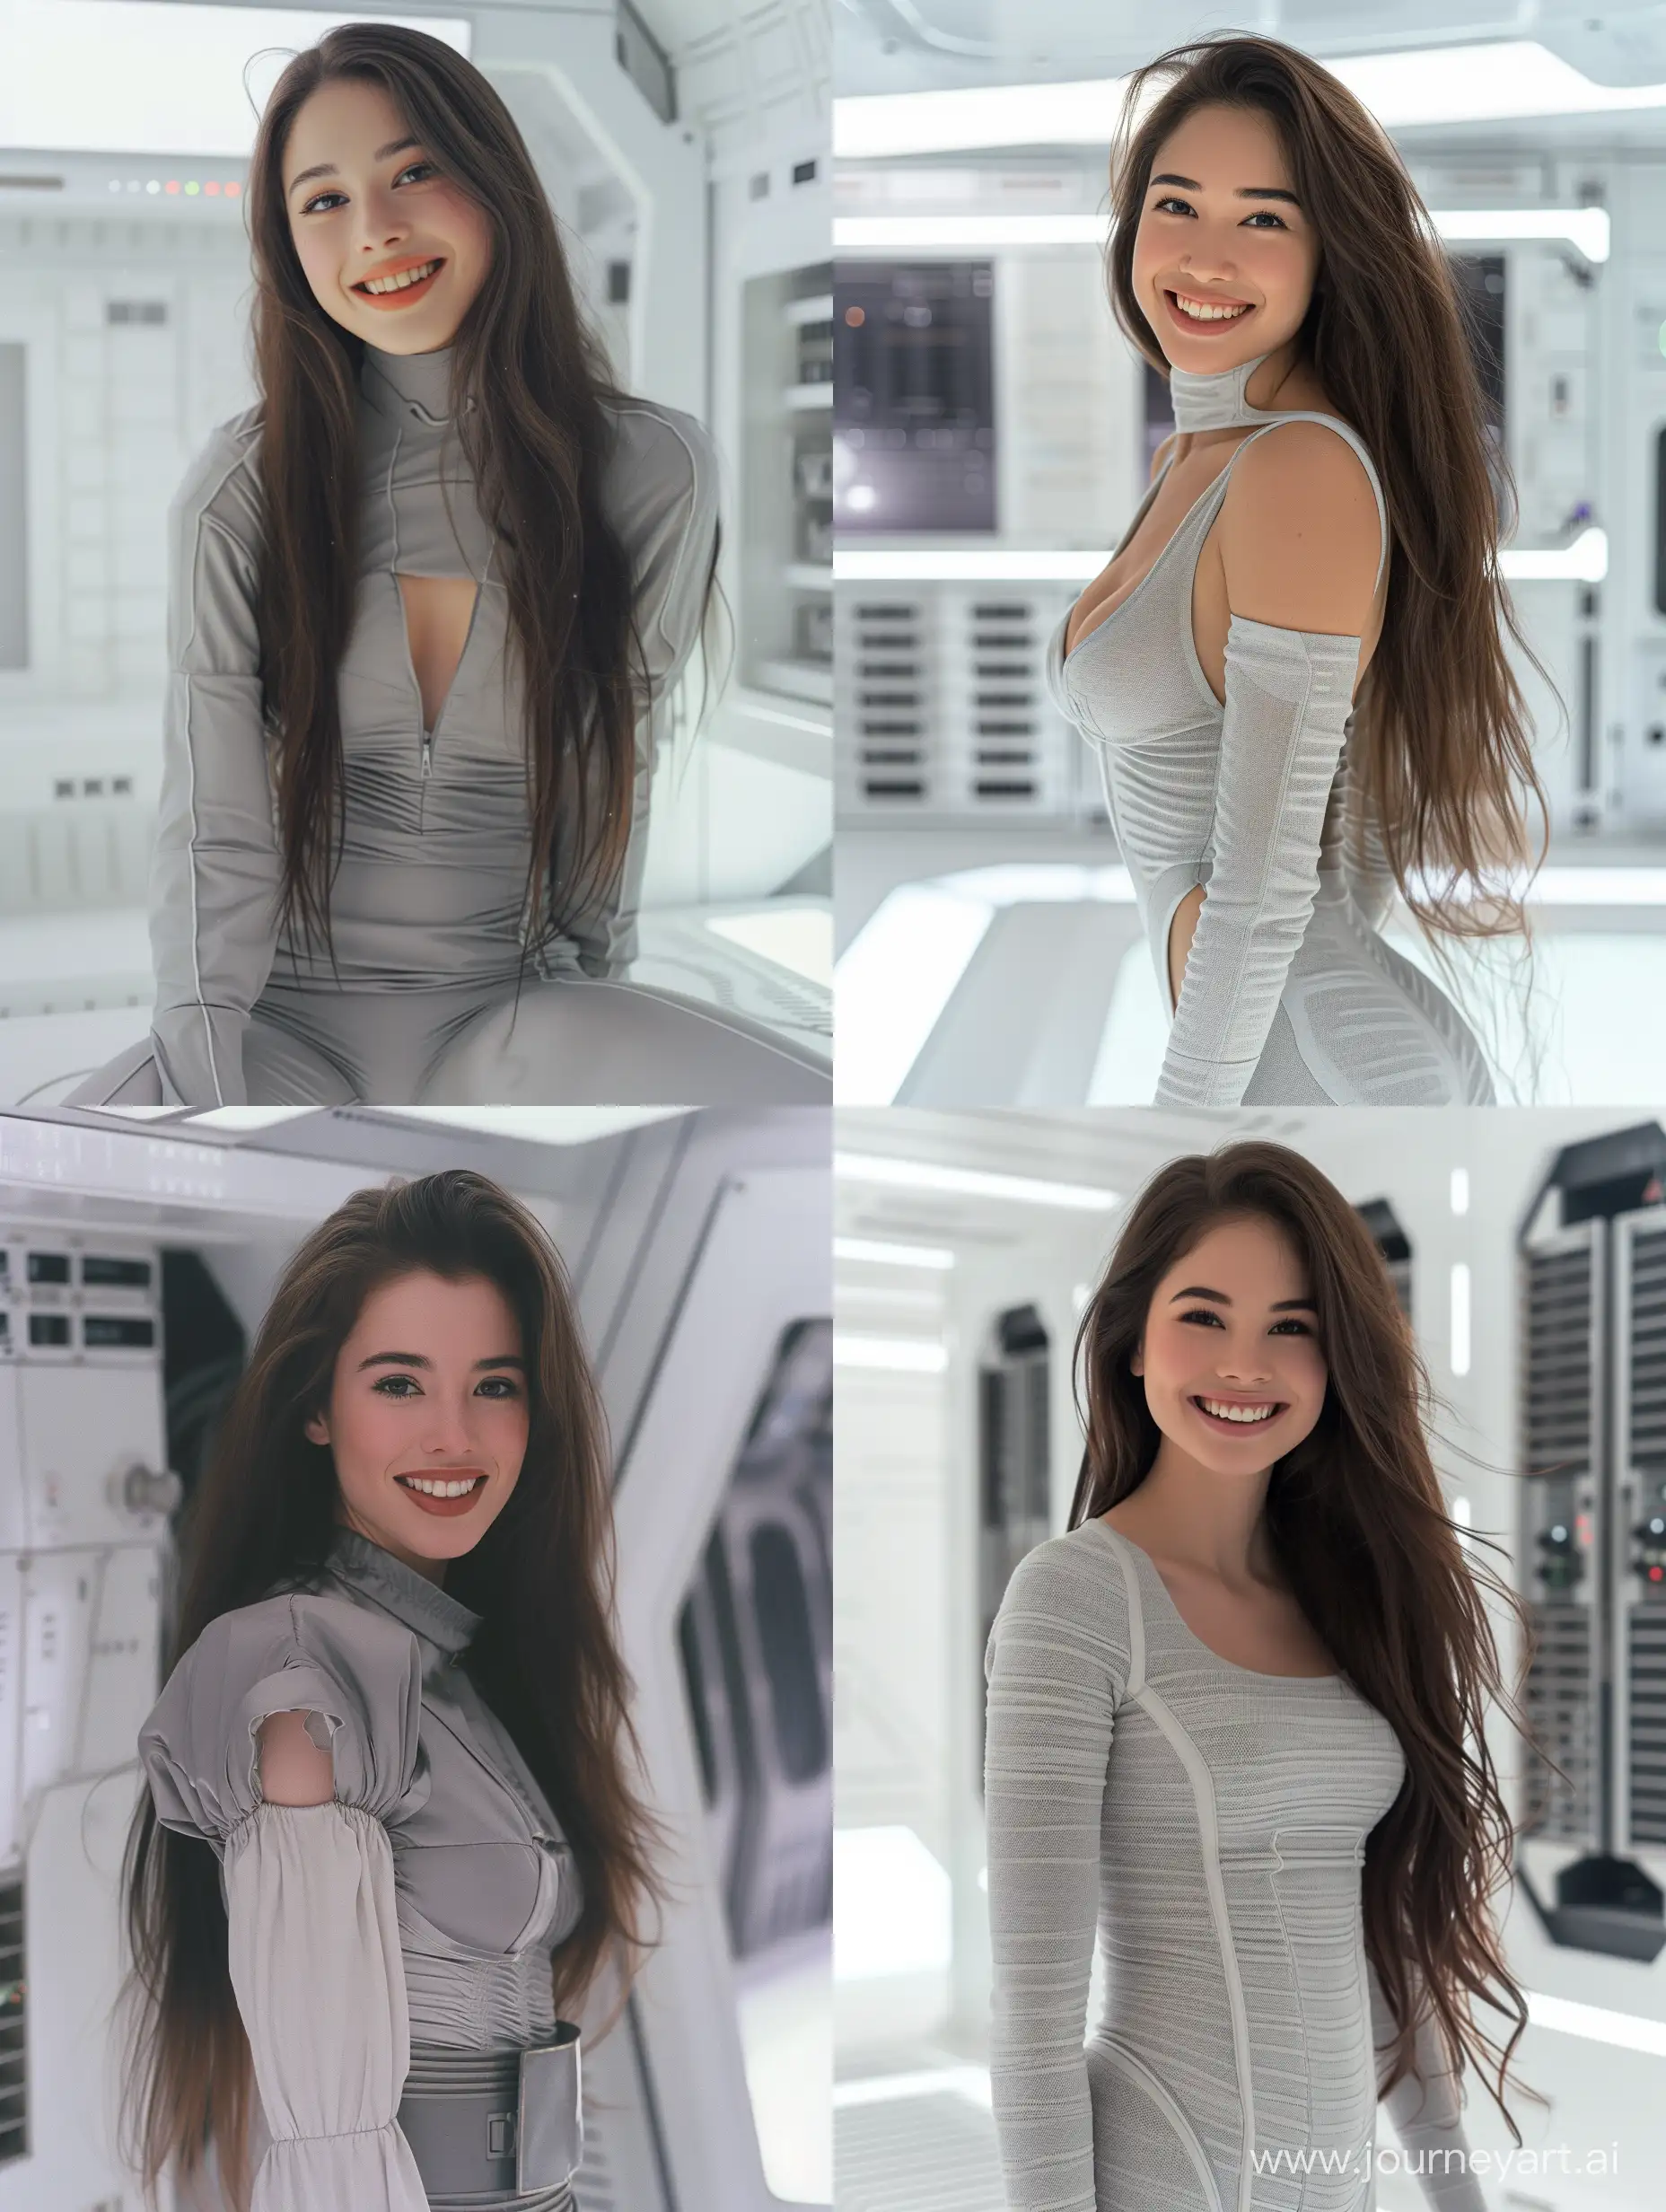 In the style of classic dull grainy comic color, Full body Photo Portrait of a gorgeous young woman with long brown hair and perfect smile and warm perfect skin, she dressed in gray white futuristic clothing, white background, inside the gpu cluster server high tech labs, roman emporer attire, in the style of unpretentious elegance, 1990s, blink-and-you-miss-it detail, dreamlike scenes, iconic, sci-fi city scene, space bathroom, katsuhiro otomo classic comics style, grain effects, film effects